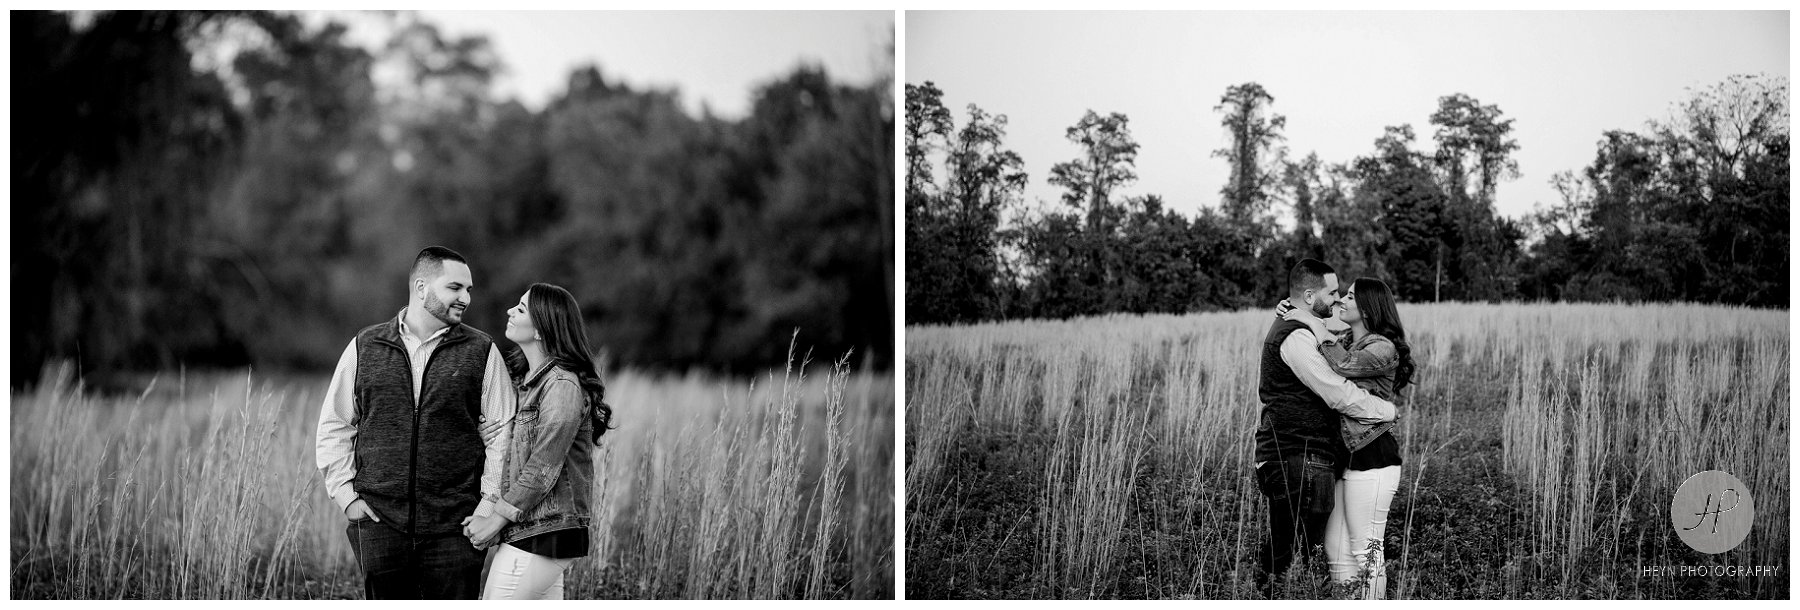 couple outside in tall grass for Bayonet Farm engagement session in new jersey 